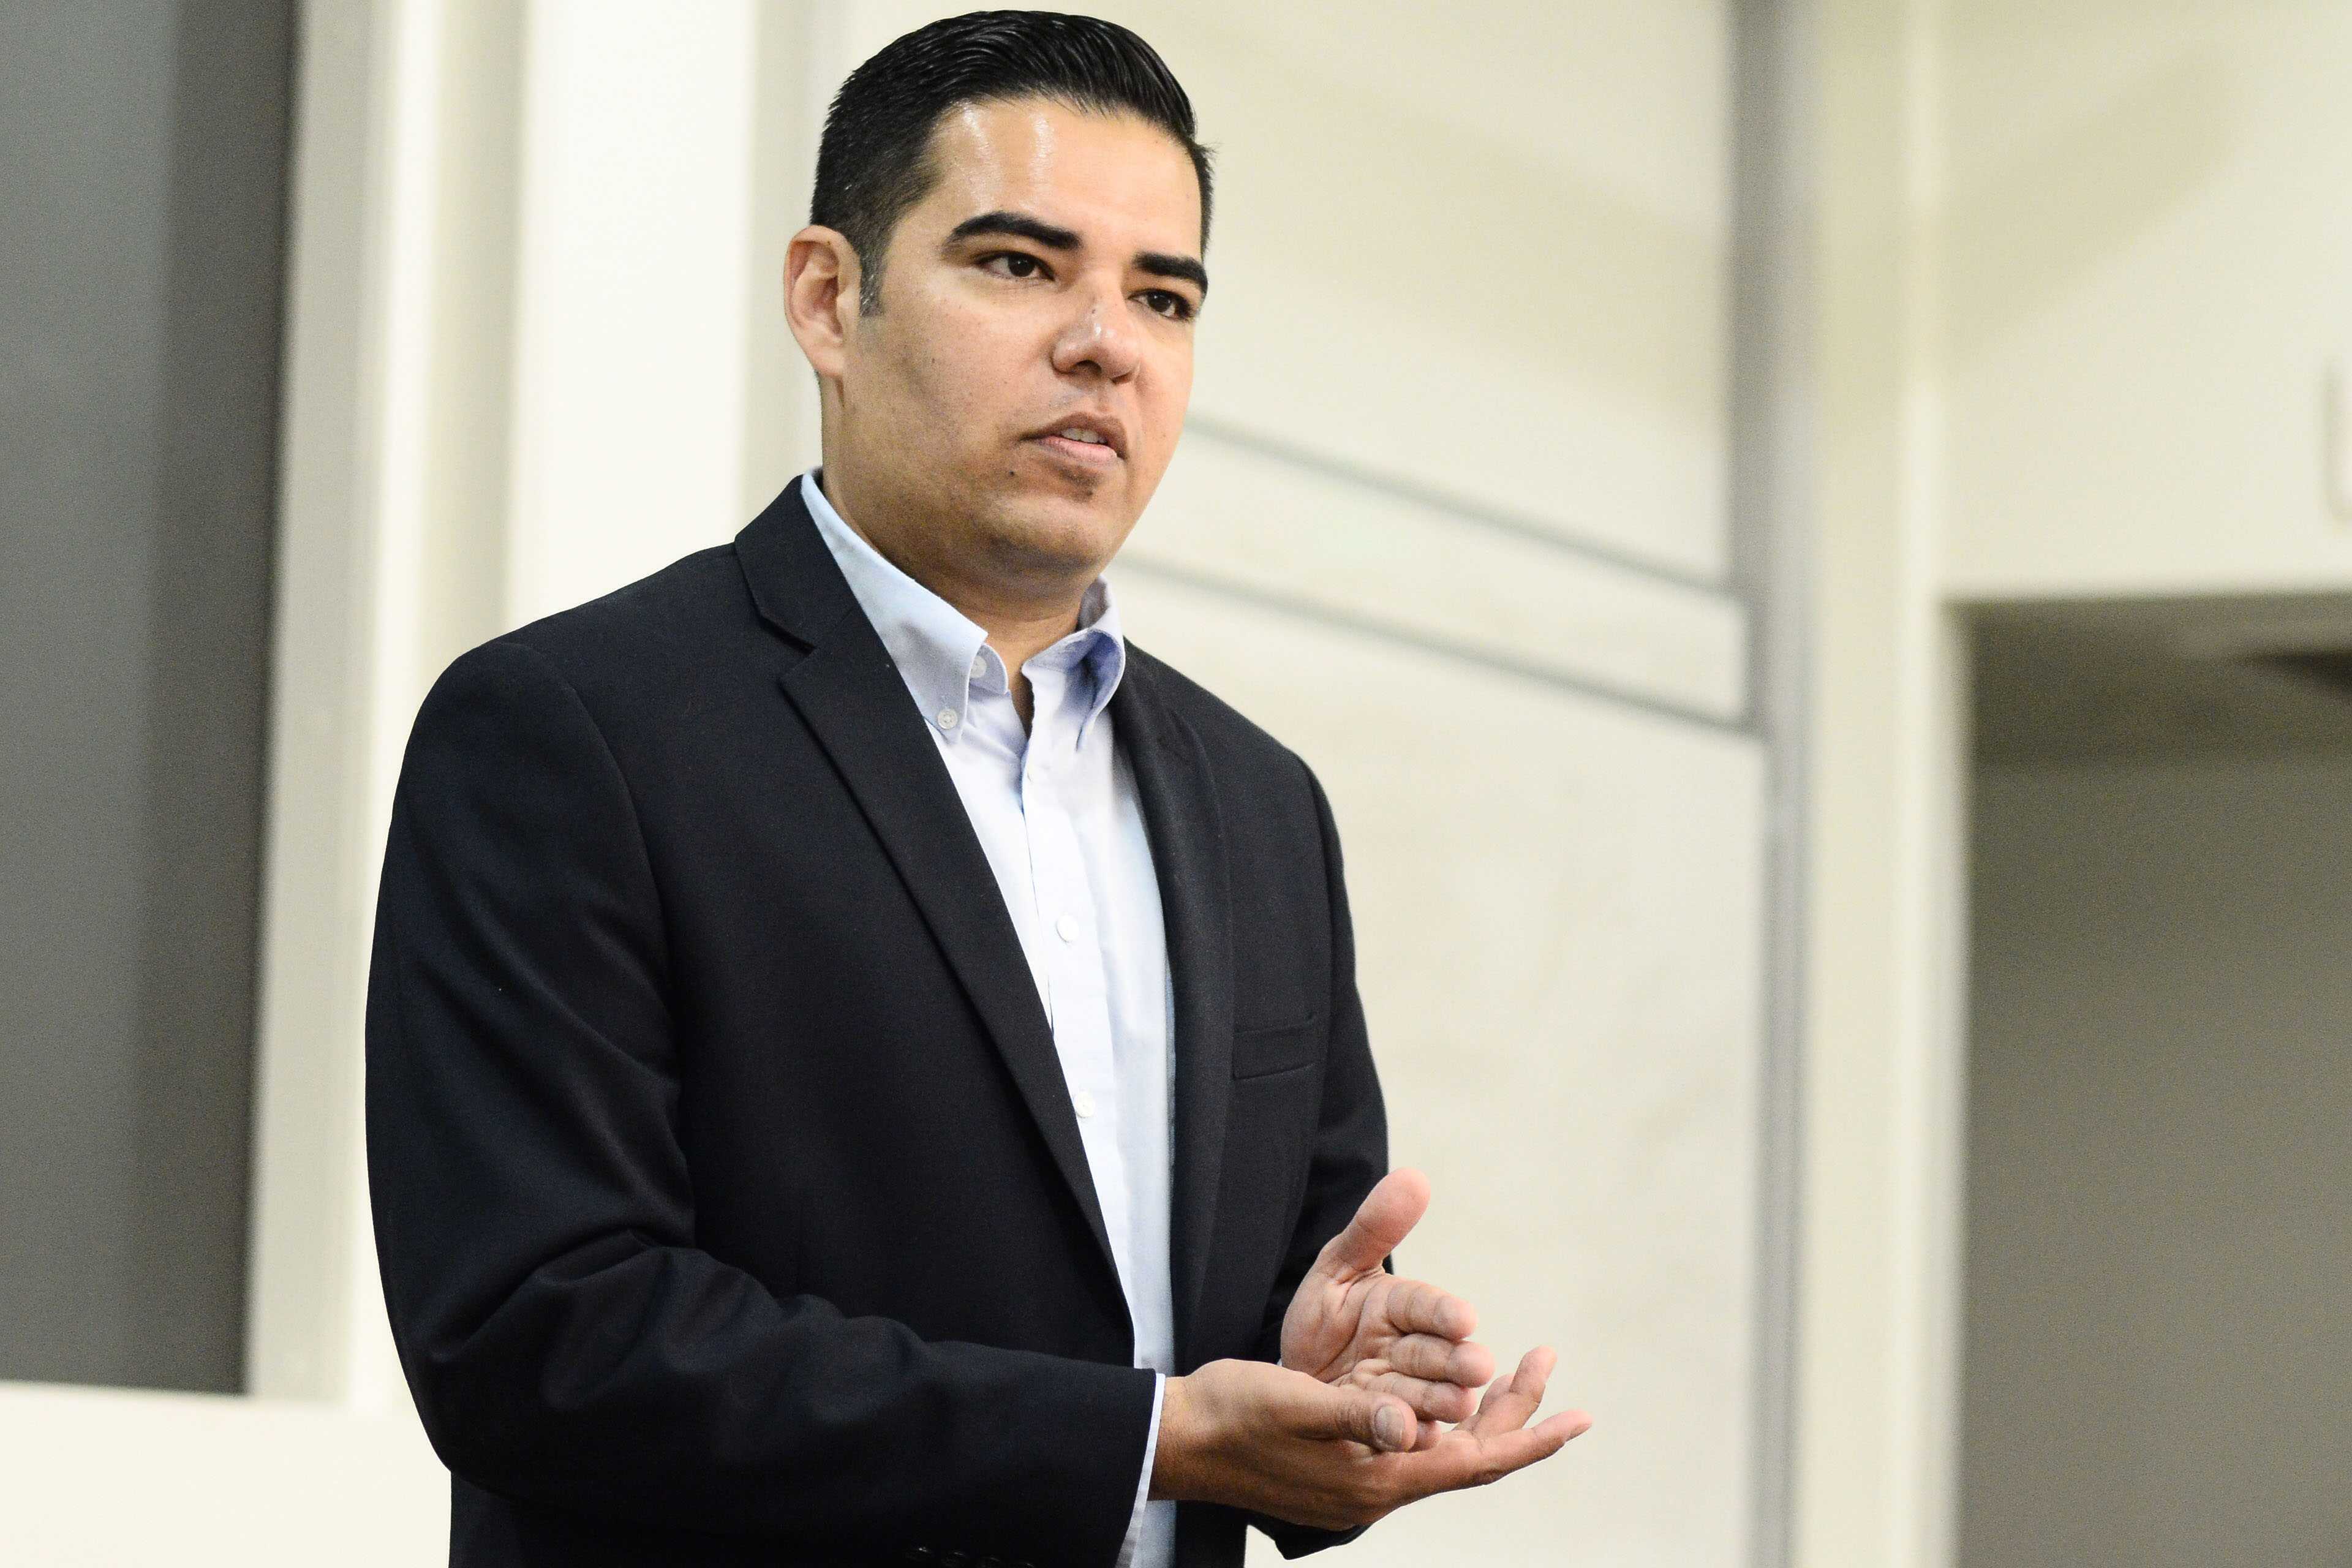 Picture contains Mayor Robert Garcia standing in front of a white building